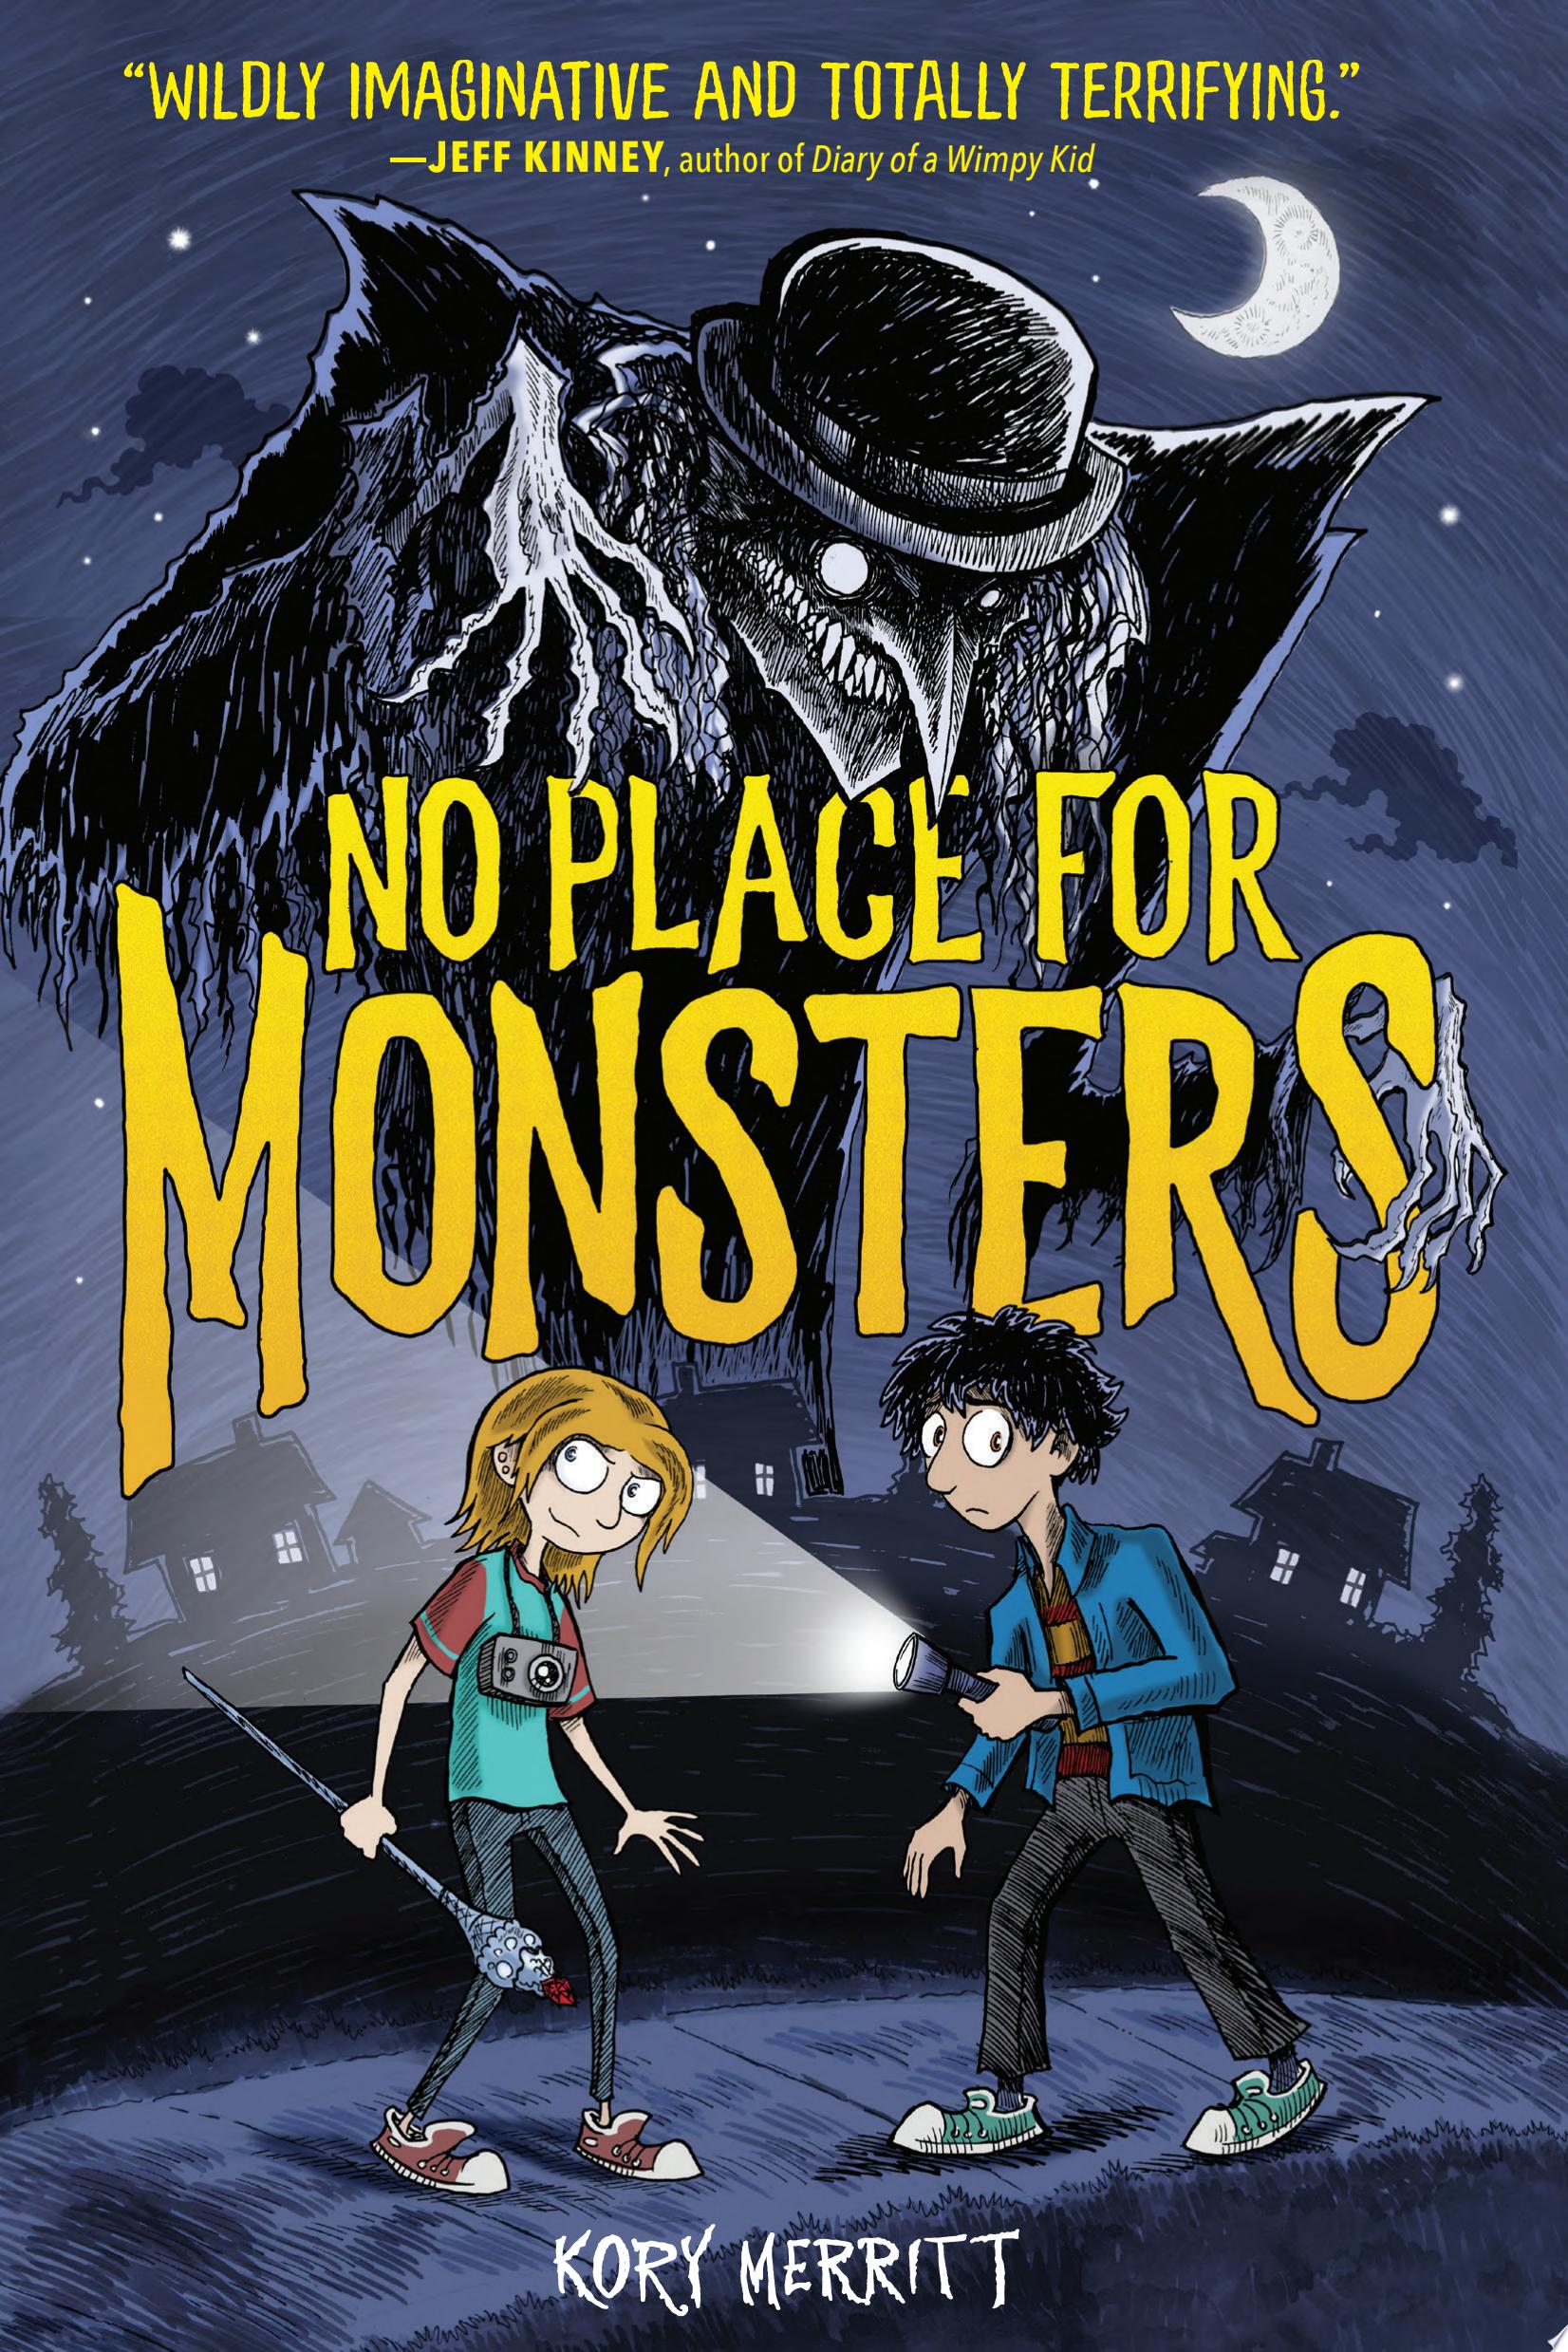 Image for "No Place for Monsters"